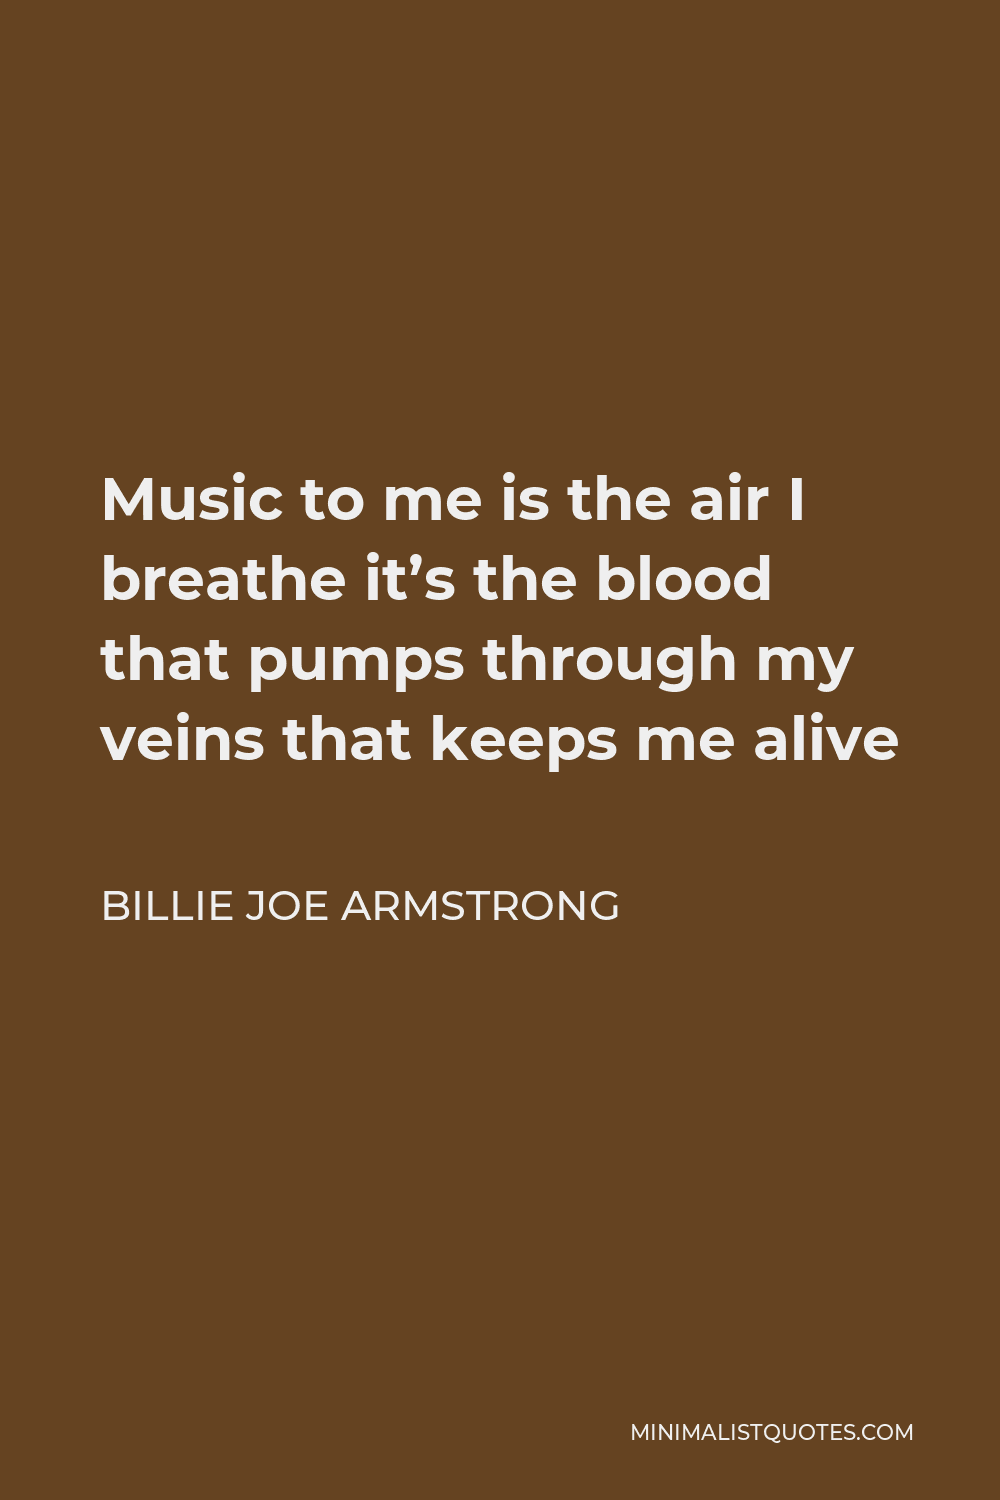 Billie Joe Armstrong Quote - Music to me is the air I breathe it’s the blood that pumps through my veins that keeps me alive